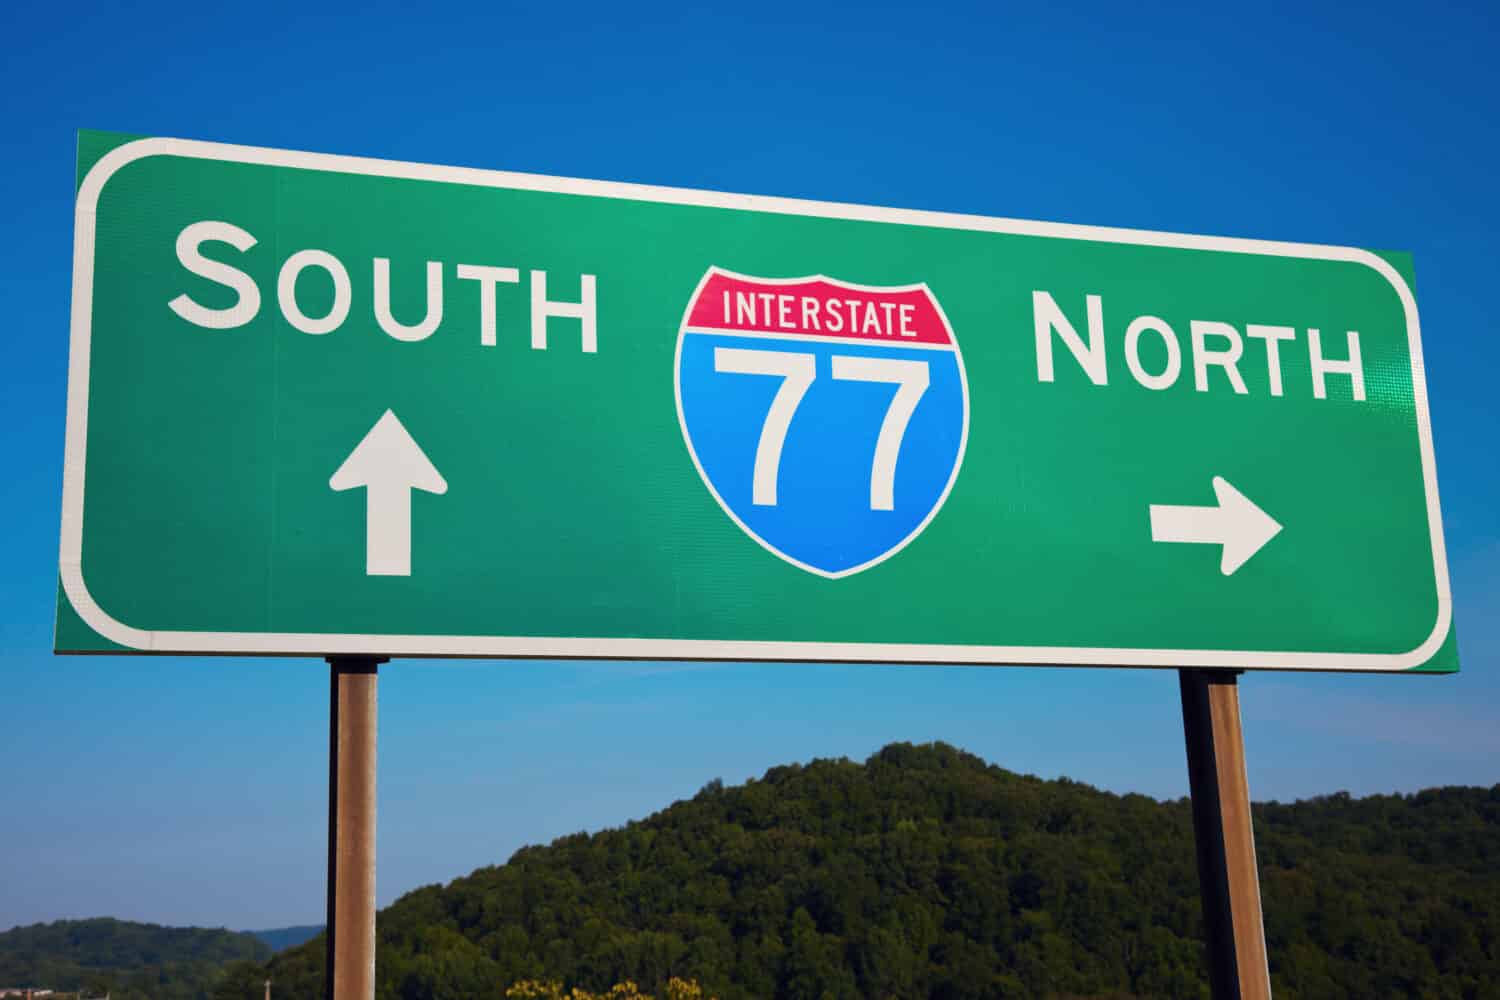 South or North? Highway 77 seen in Ohio, Cleveland area.